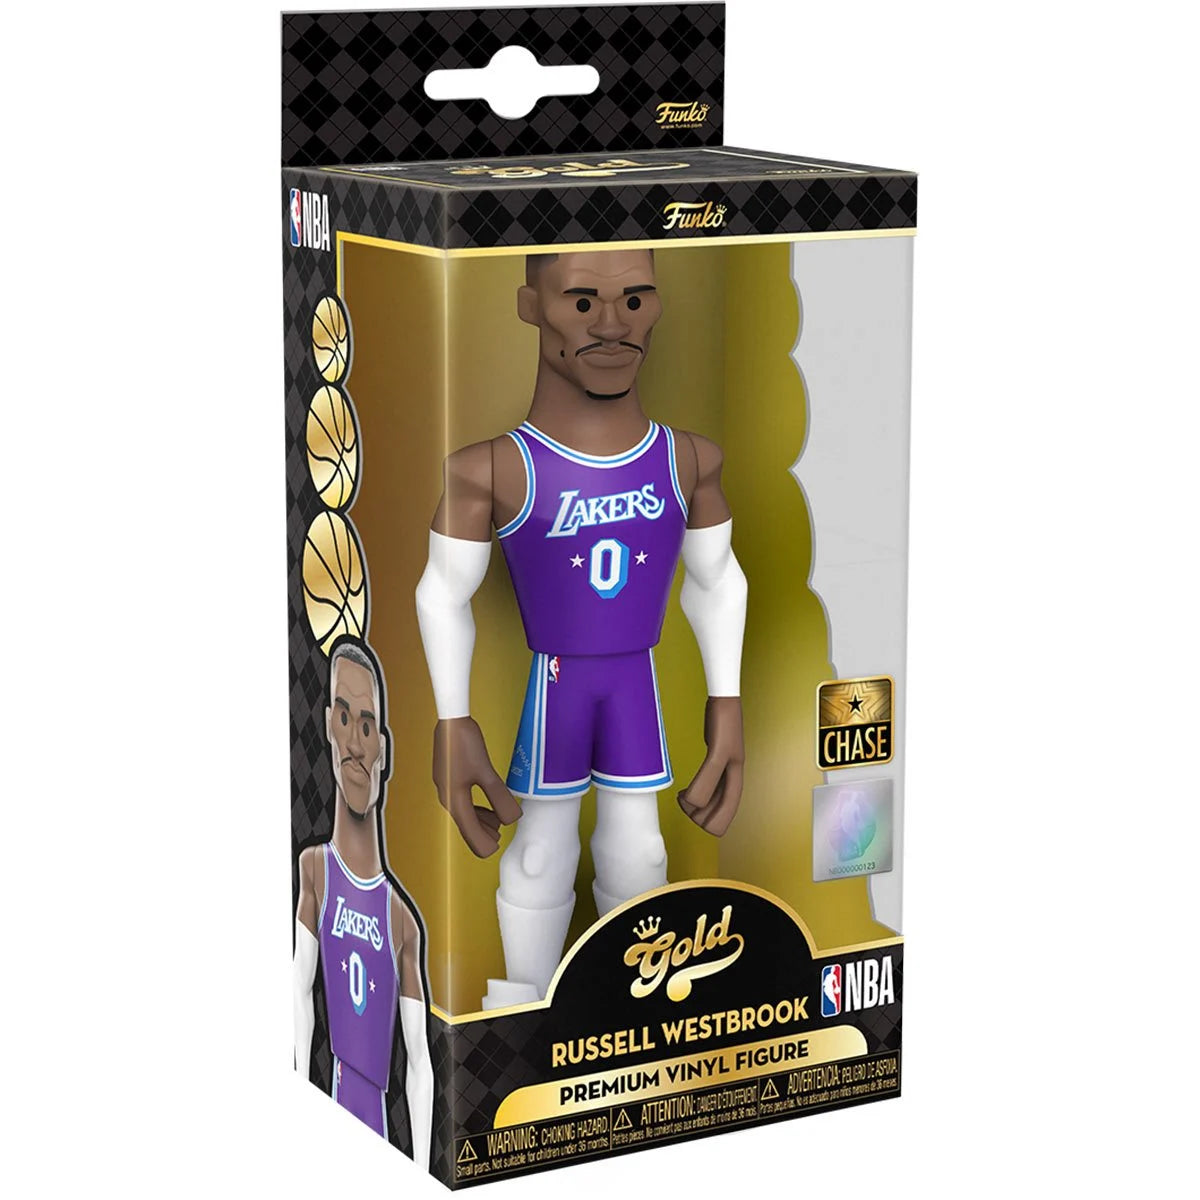 Russell Westbrook (City Edition 2021) Lakers NBA 5-Inch Funko Vinyl Gold Figure w/ Chance of chase!